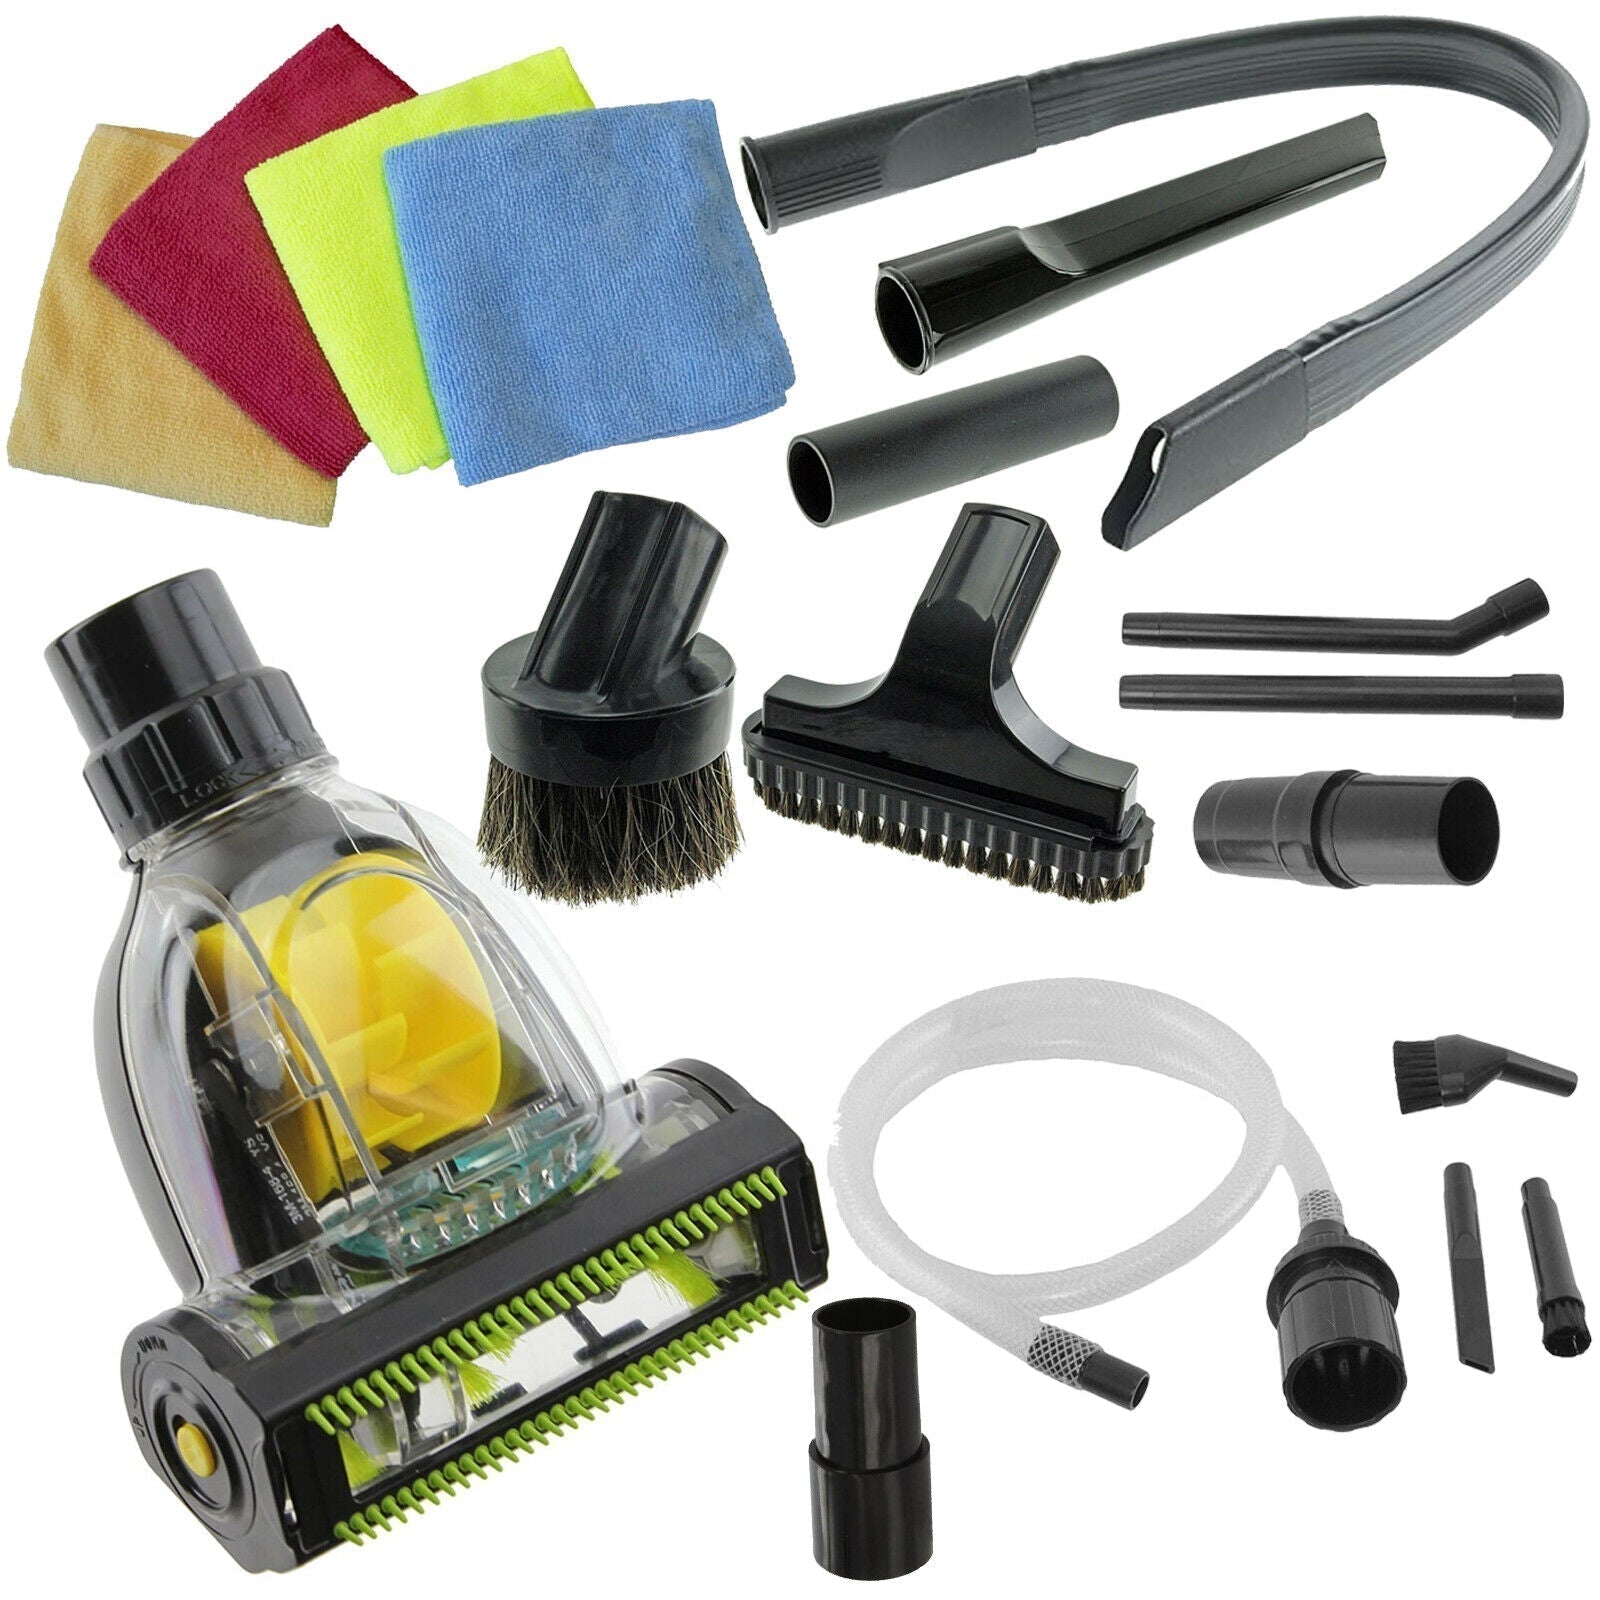 Car Detailing Complete Valet Kit with Micro Tools & Cloths compatible with RUSSELL HOBBS Vacuum Cleaner (32mm/35mm)